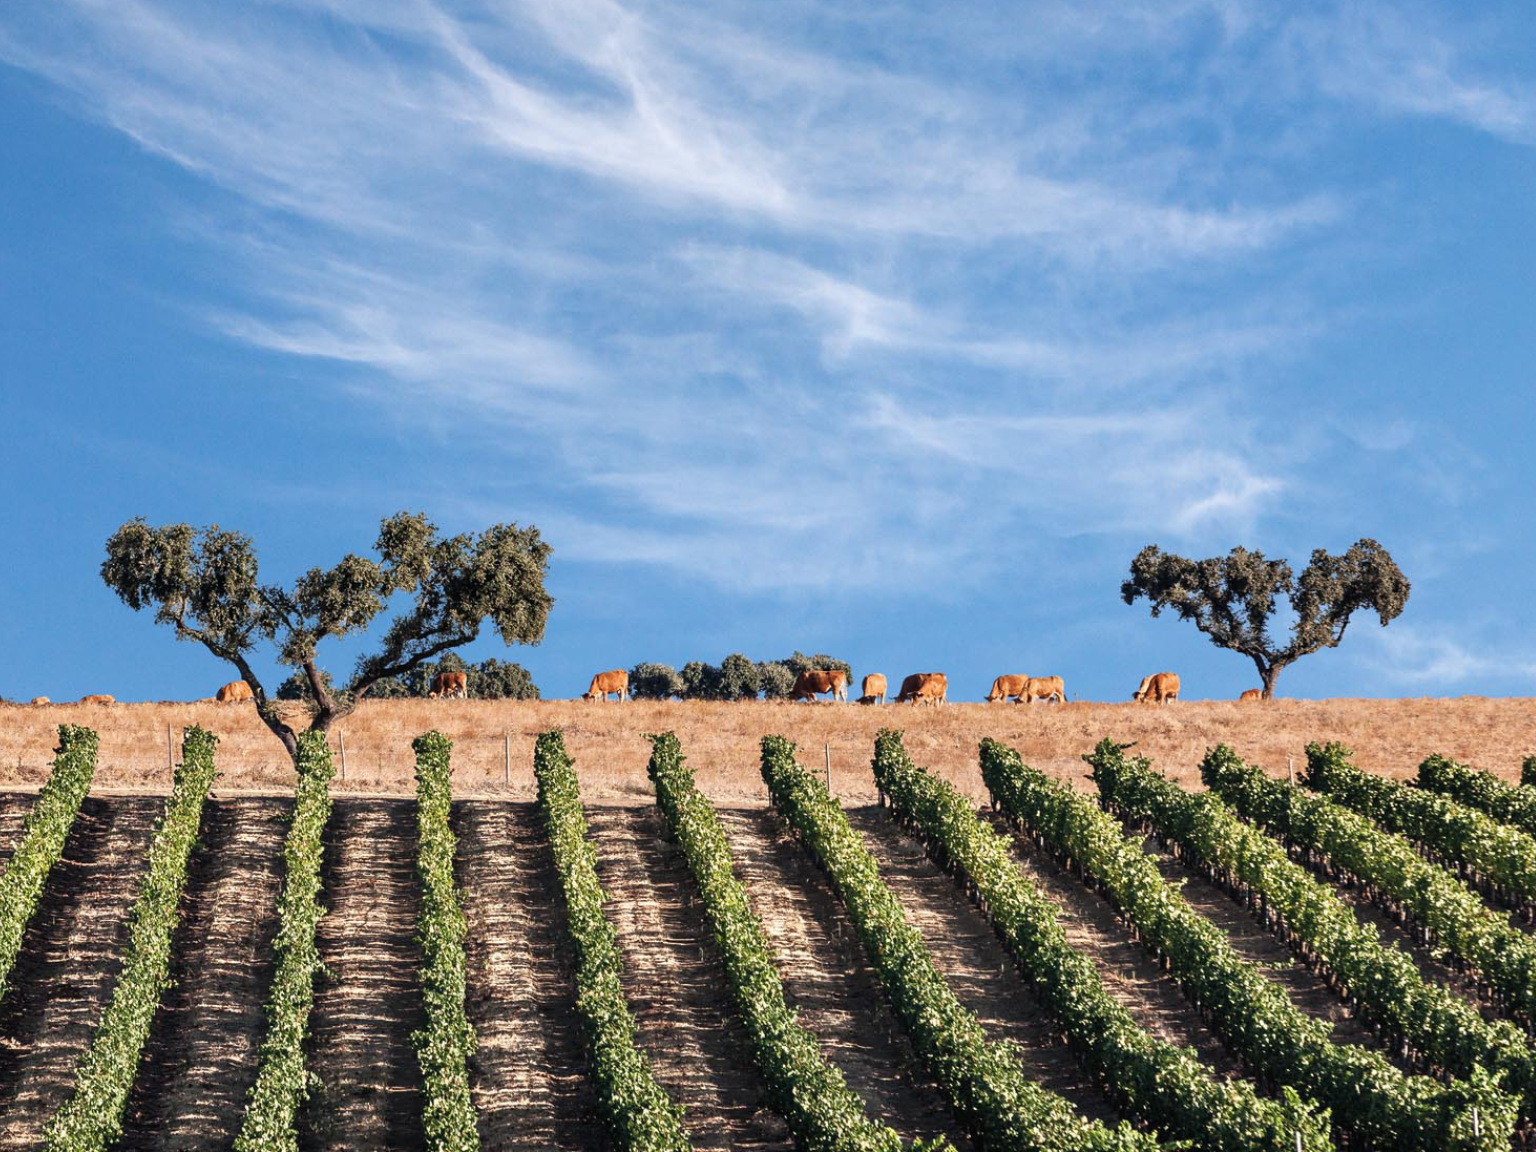 The Best of Wine Tourism in Portugal